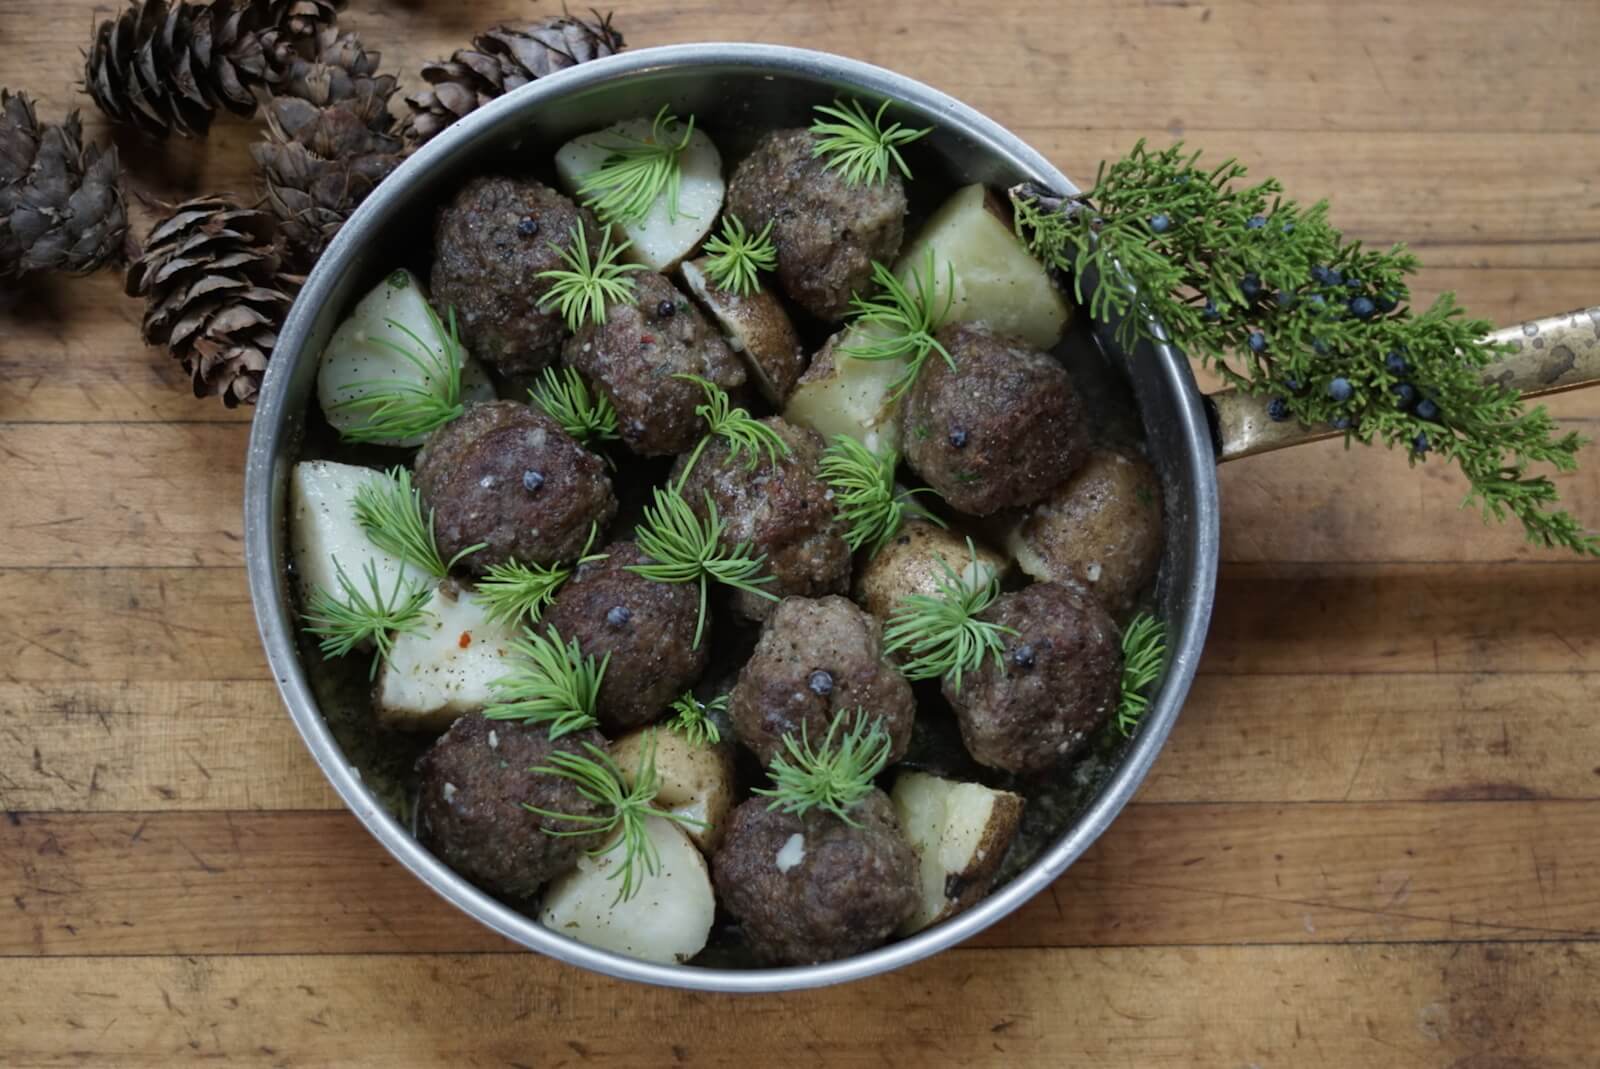 Recipe for Nordic Meatballs served with potatoes and pine sprouts